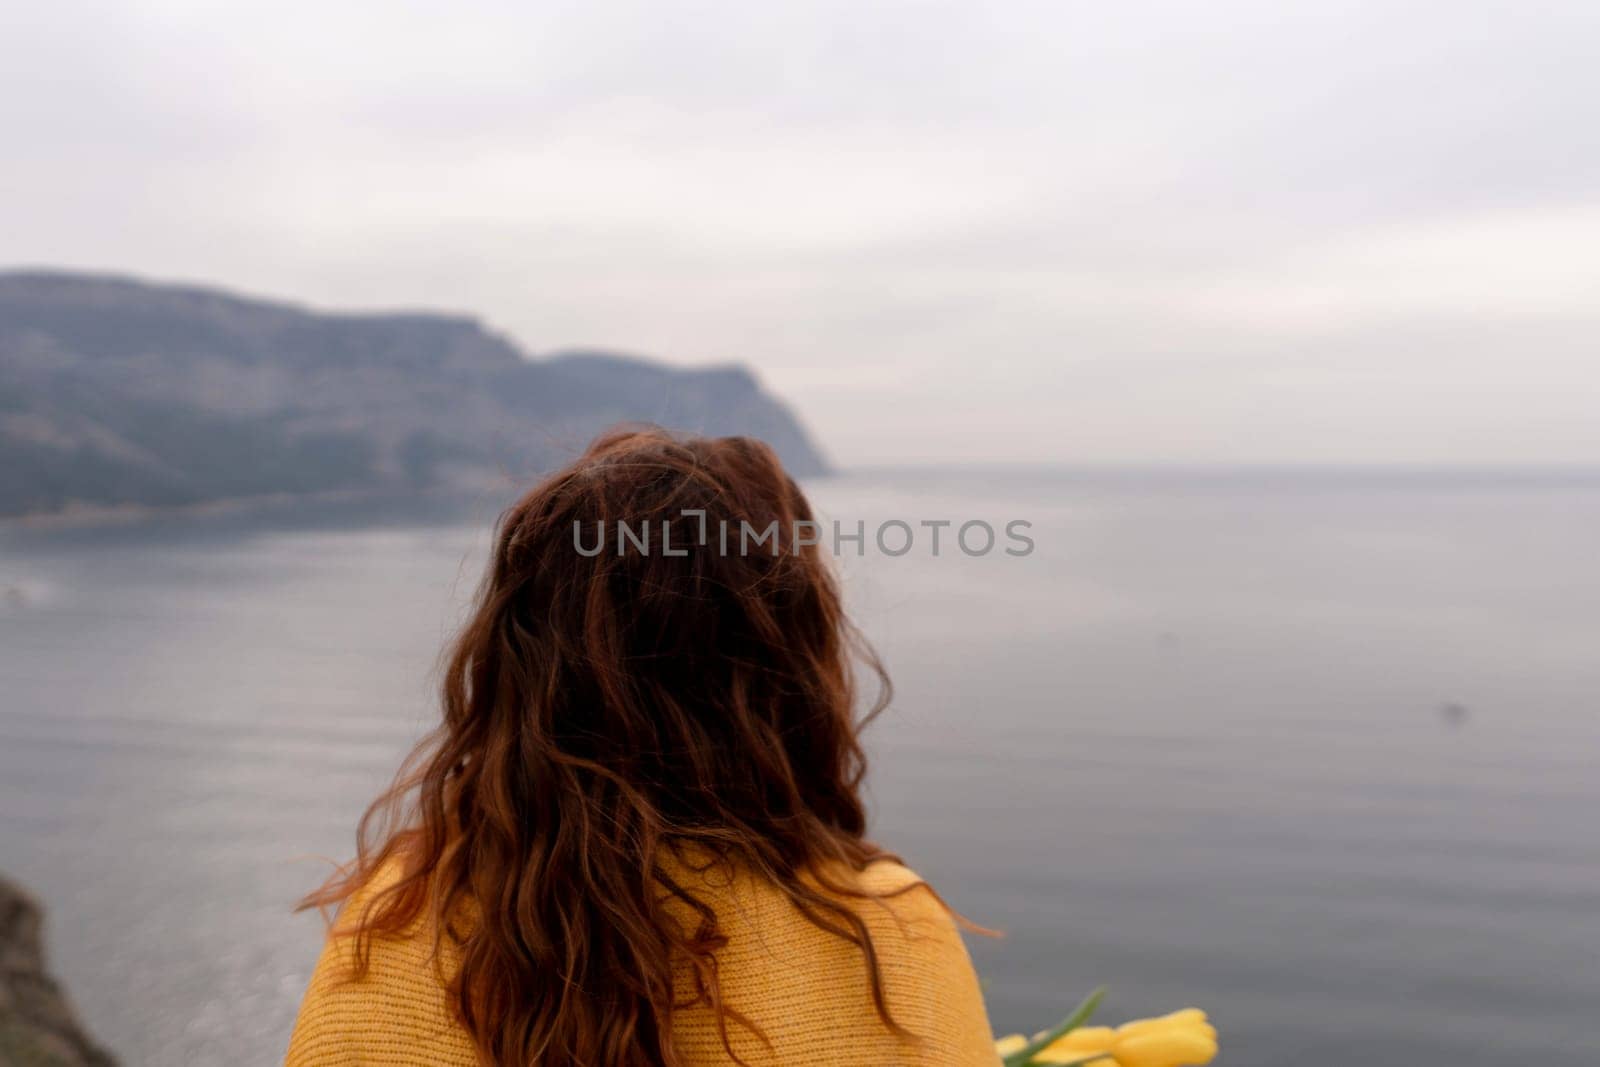 Rear view of a woman with long hair against a background of mountains and sea. Holding a bouquet of yellow tulips in her hands, wearing a yellow sweater.